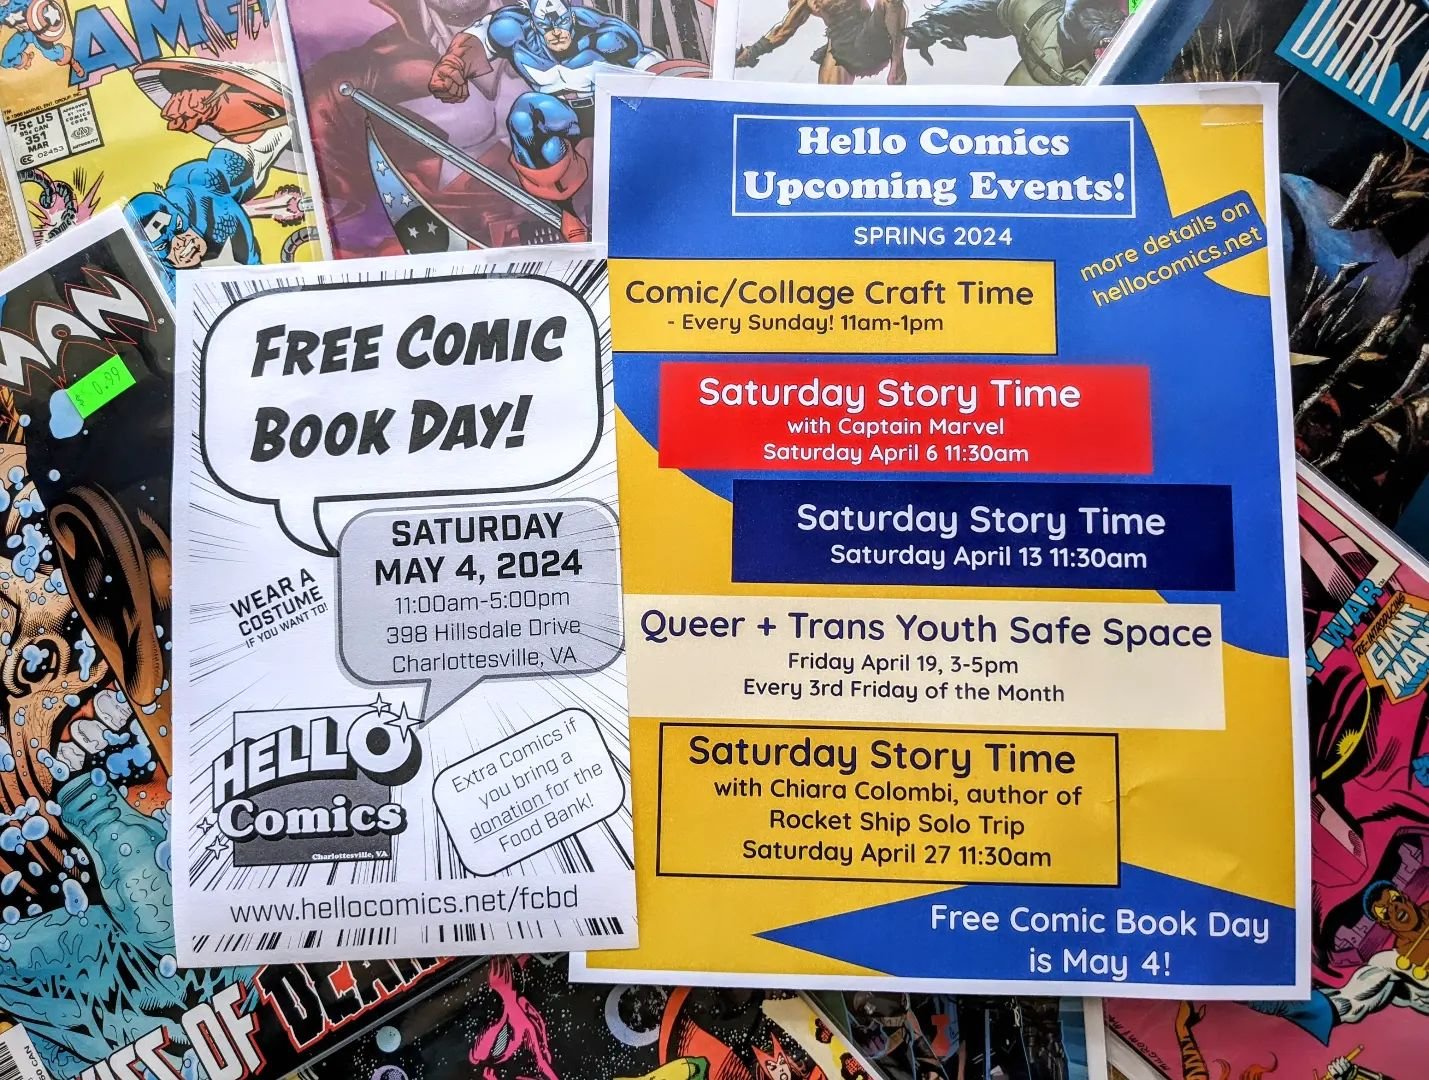 Hello Comics Spring Events 2024 ✨ We've got our Safe Space hours Tonight (4/19) from 3-5pm and crafting this Sunday (4/21) from 11-1pm, see y'all here!